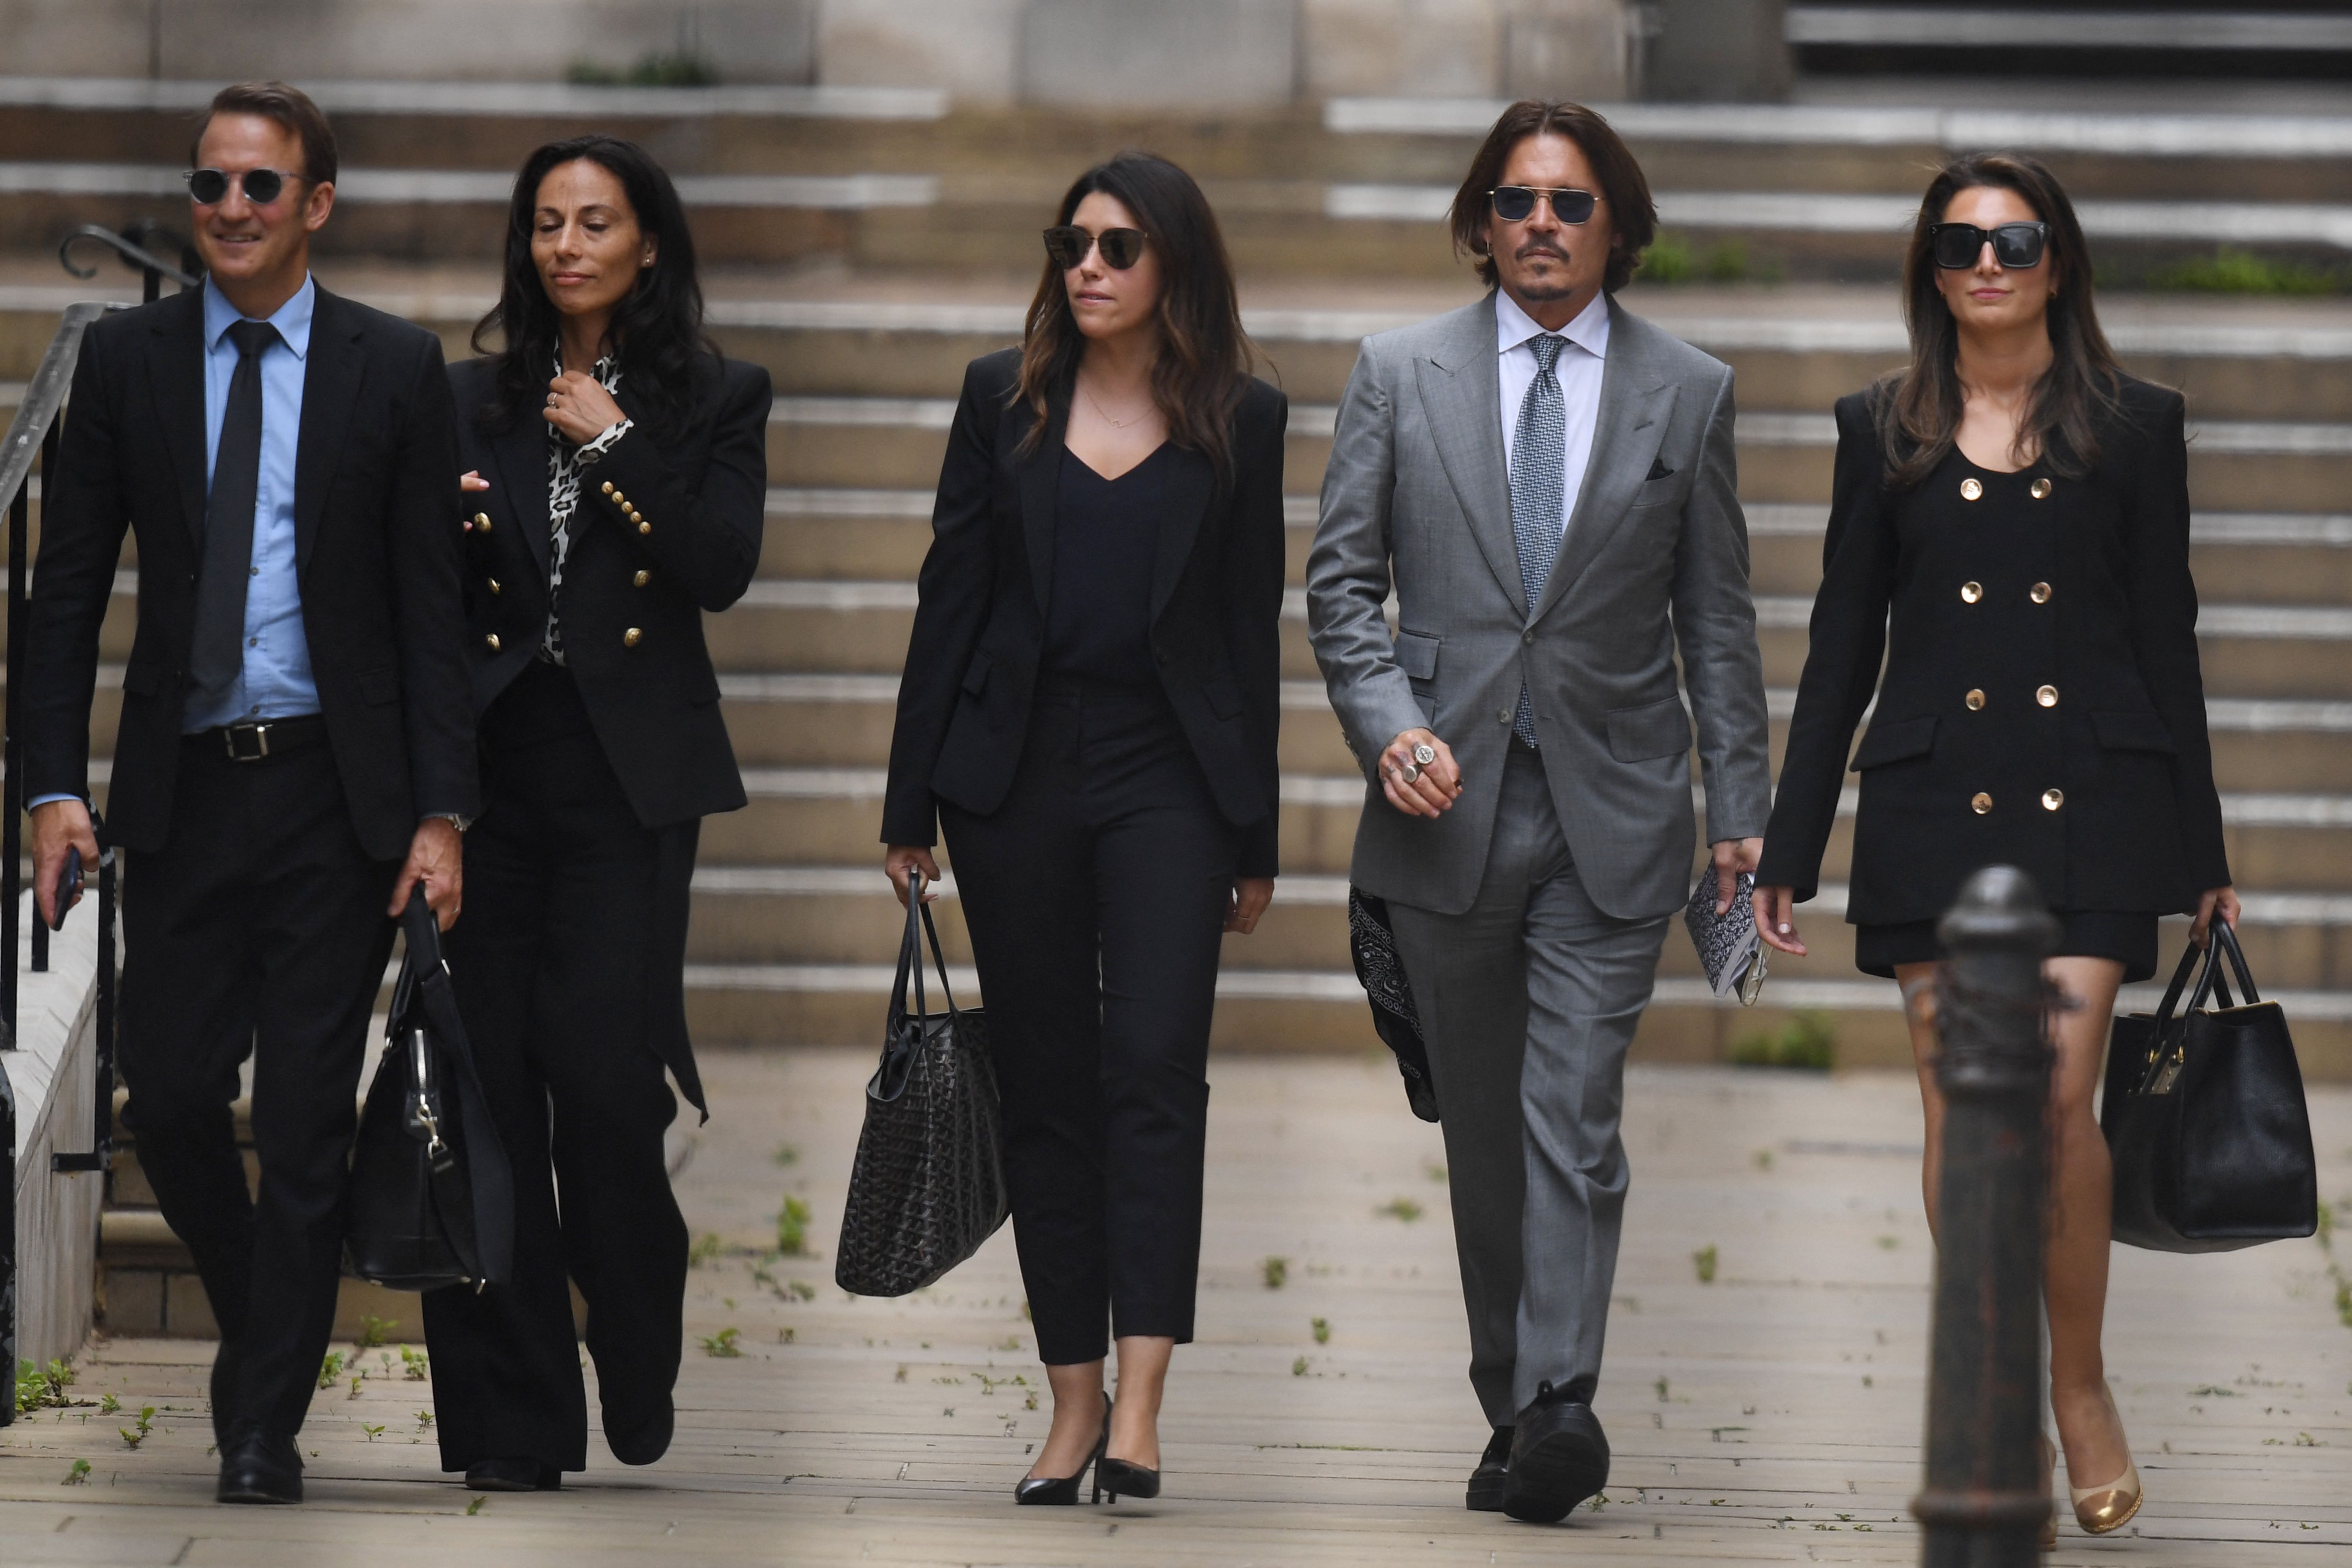 Lawyer Adam Waldman photographed with Johnny Depp and fellow colleagues at the High Court on July 16, 2020 in London | Source: Getty Images